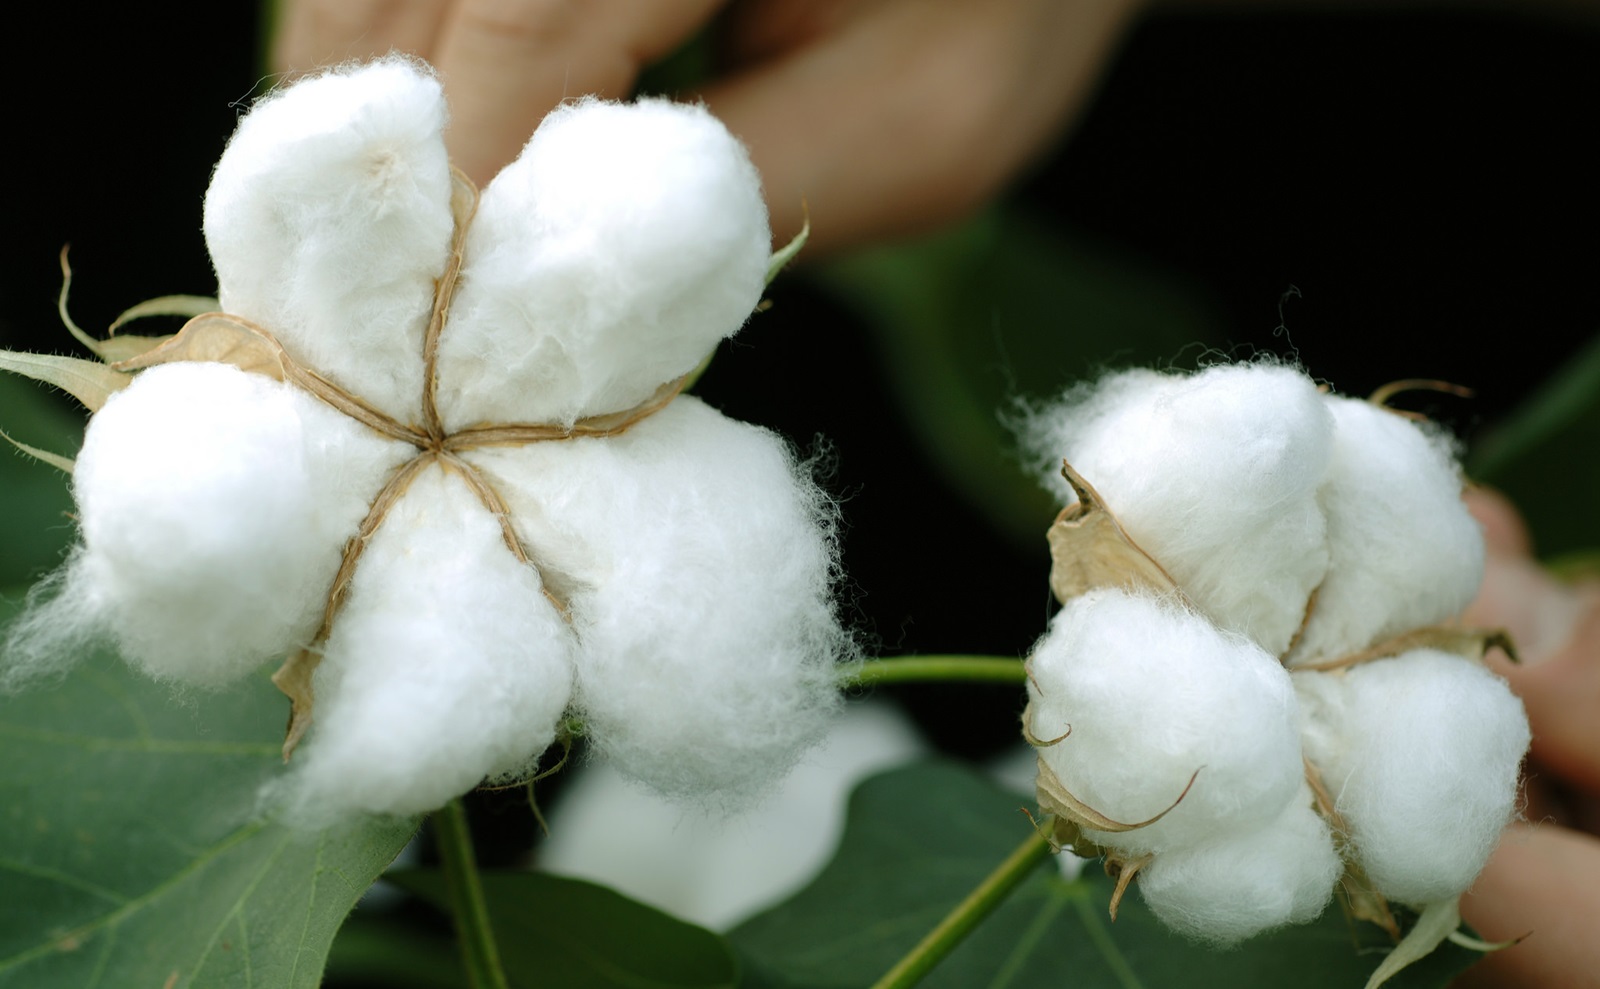 Growing Cotton with Your Kids